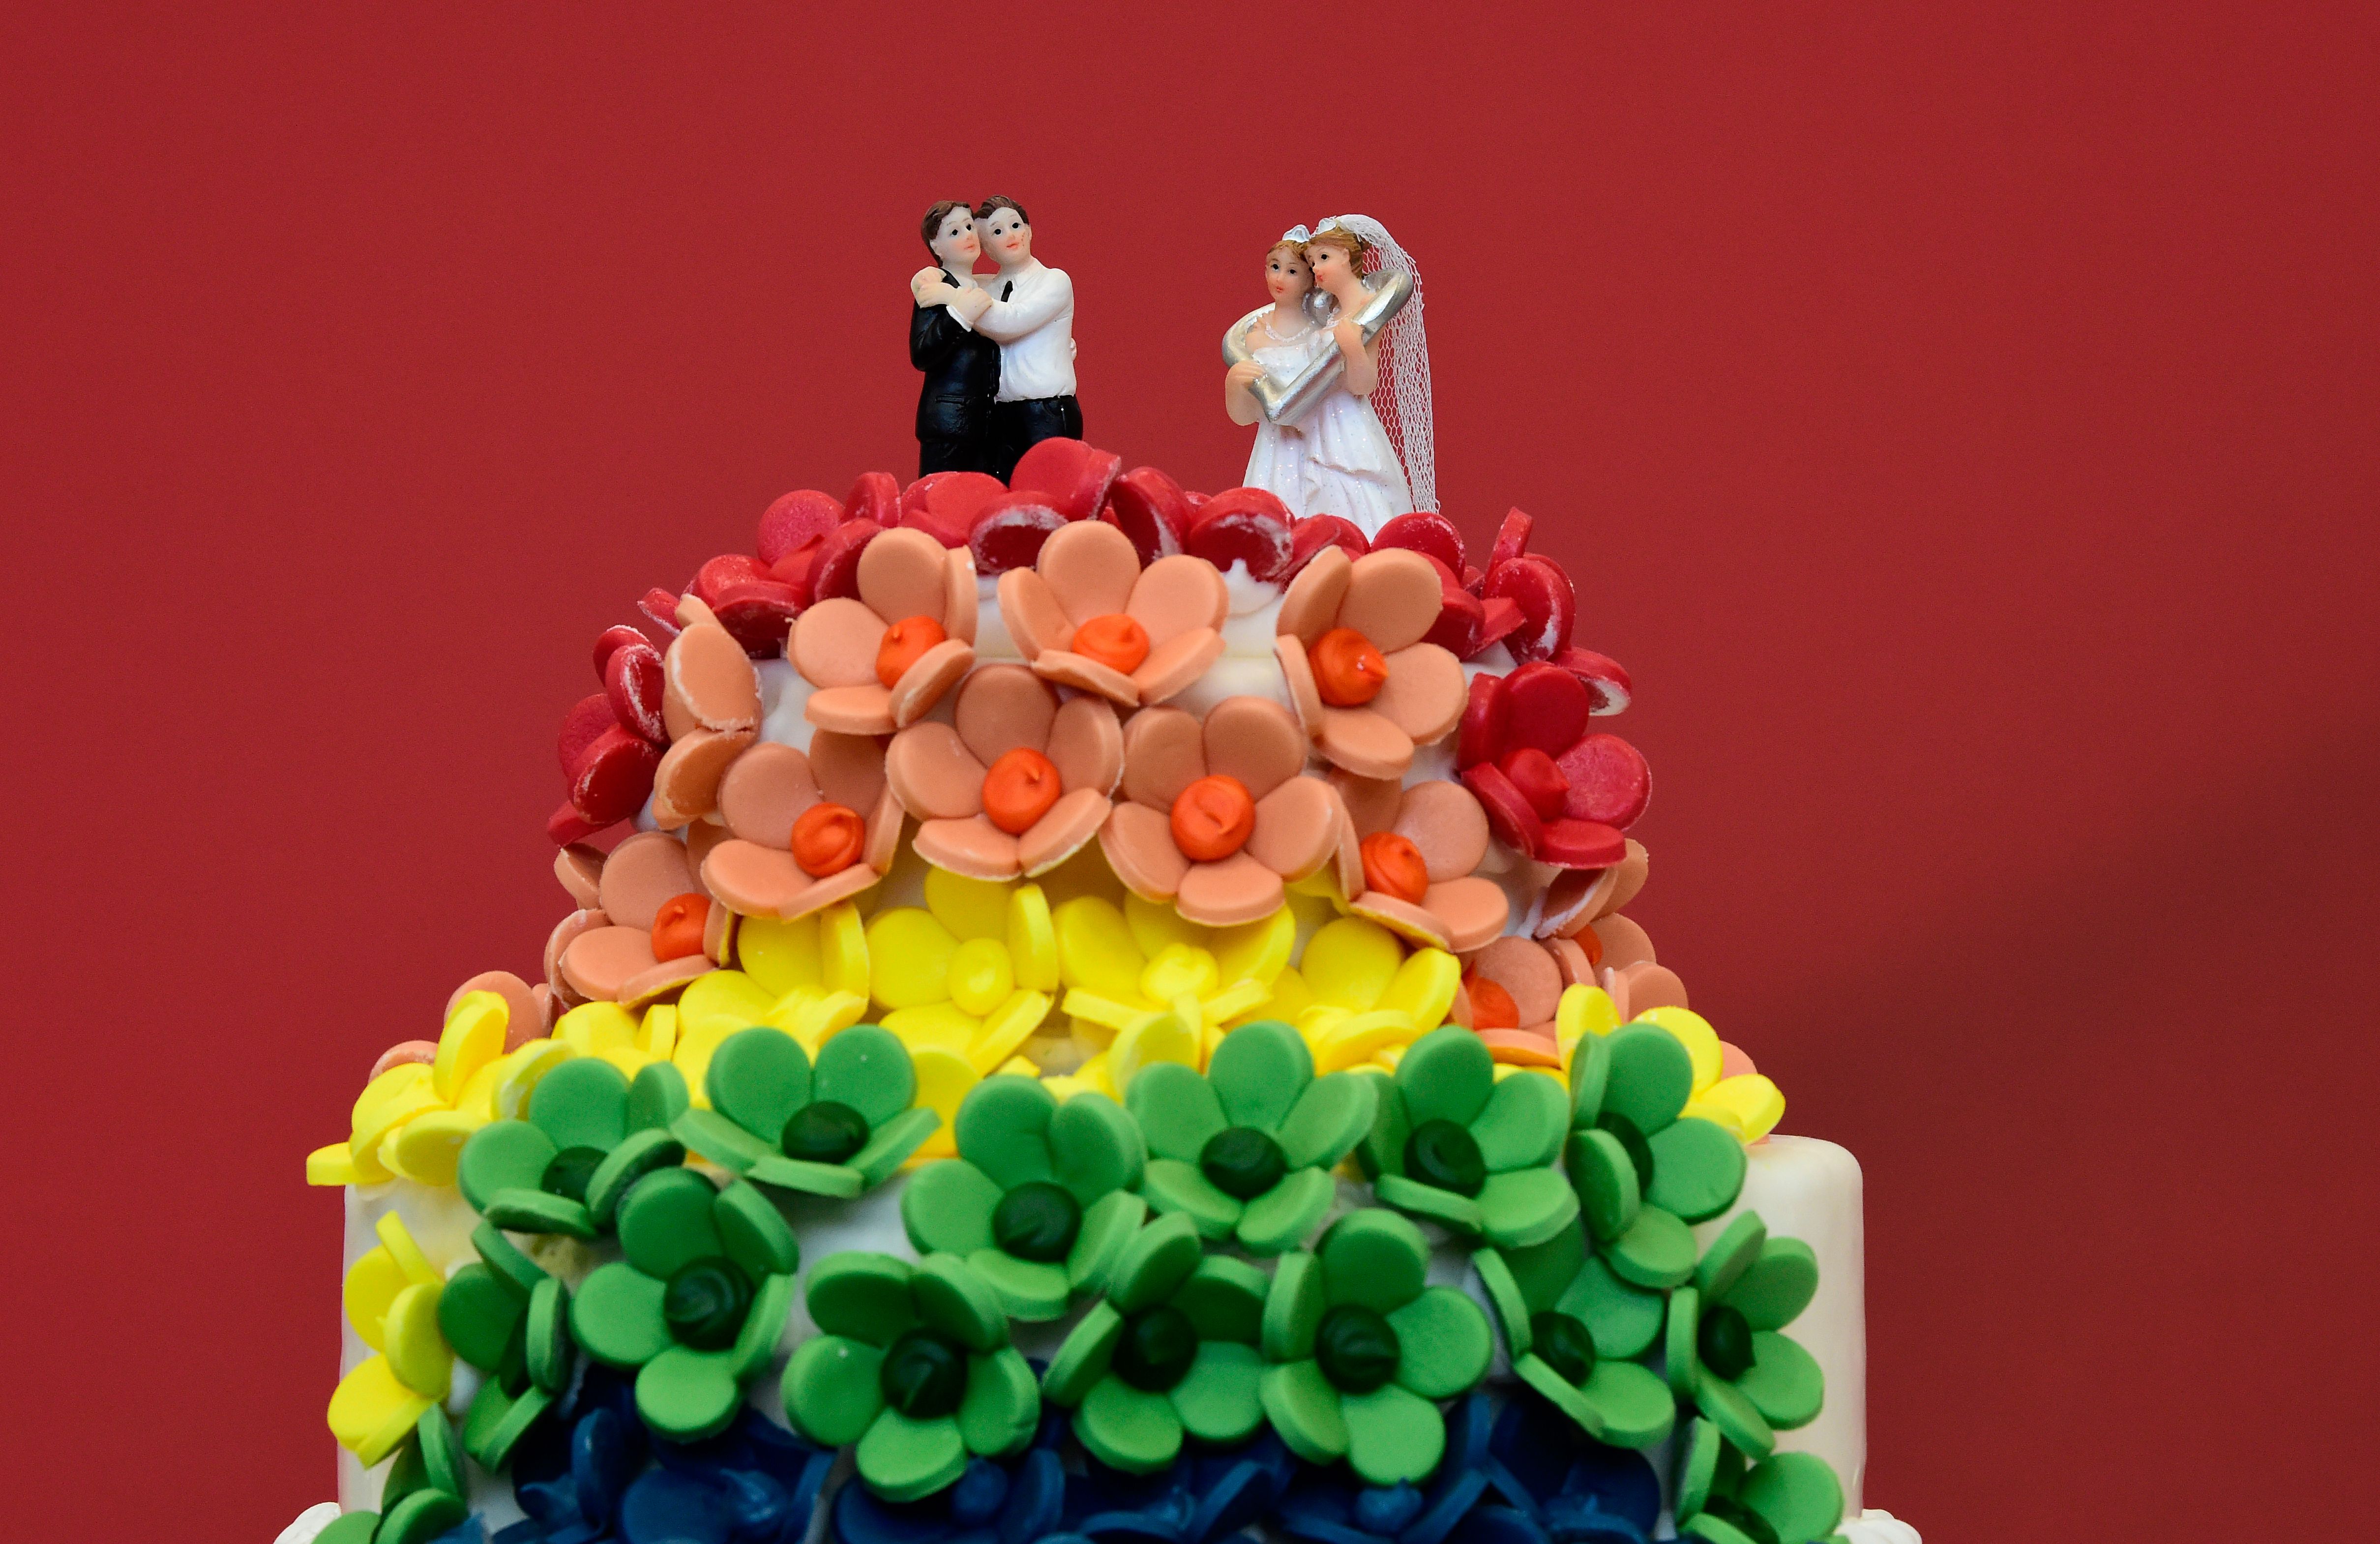 A rainbow wedding cake topped with same-sex couples